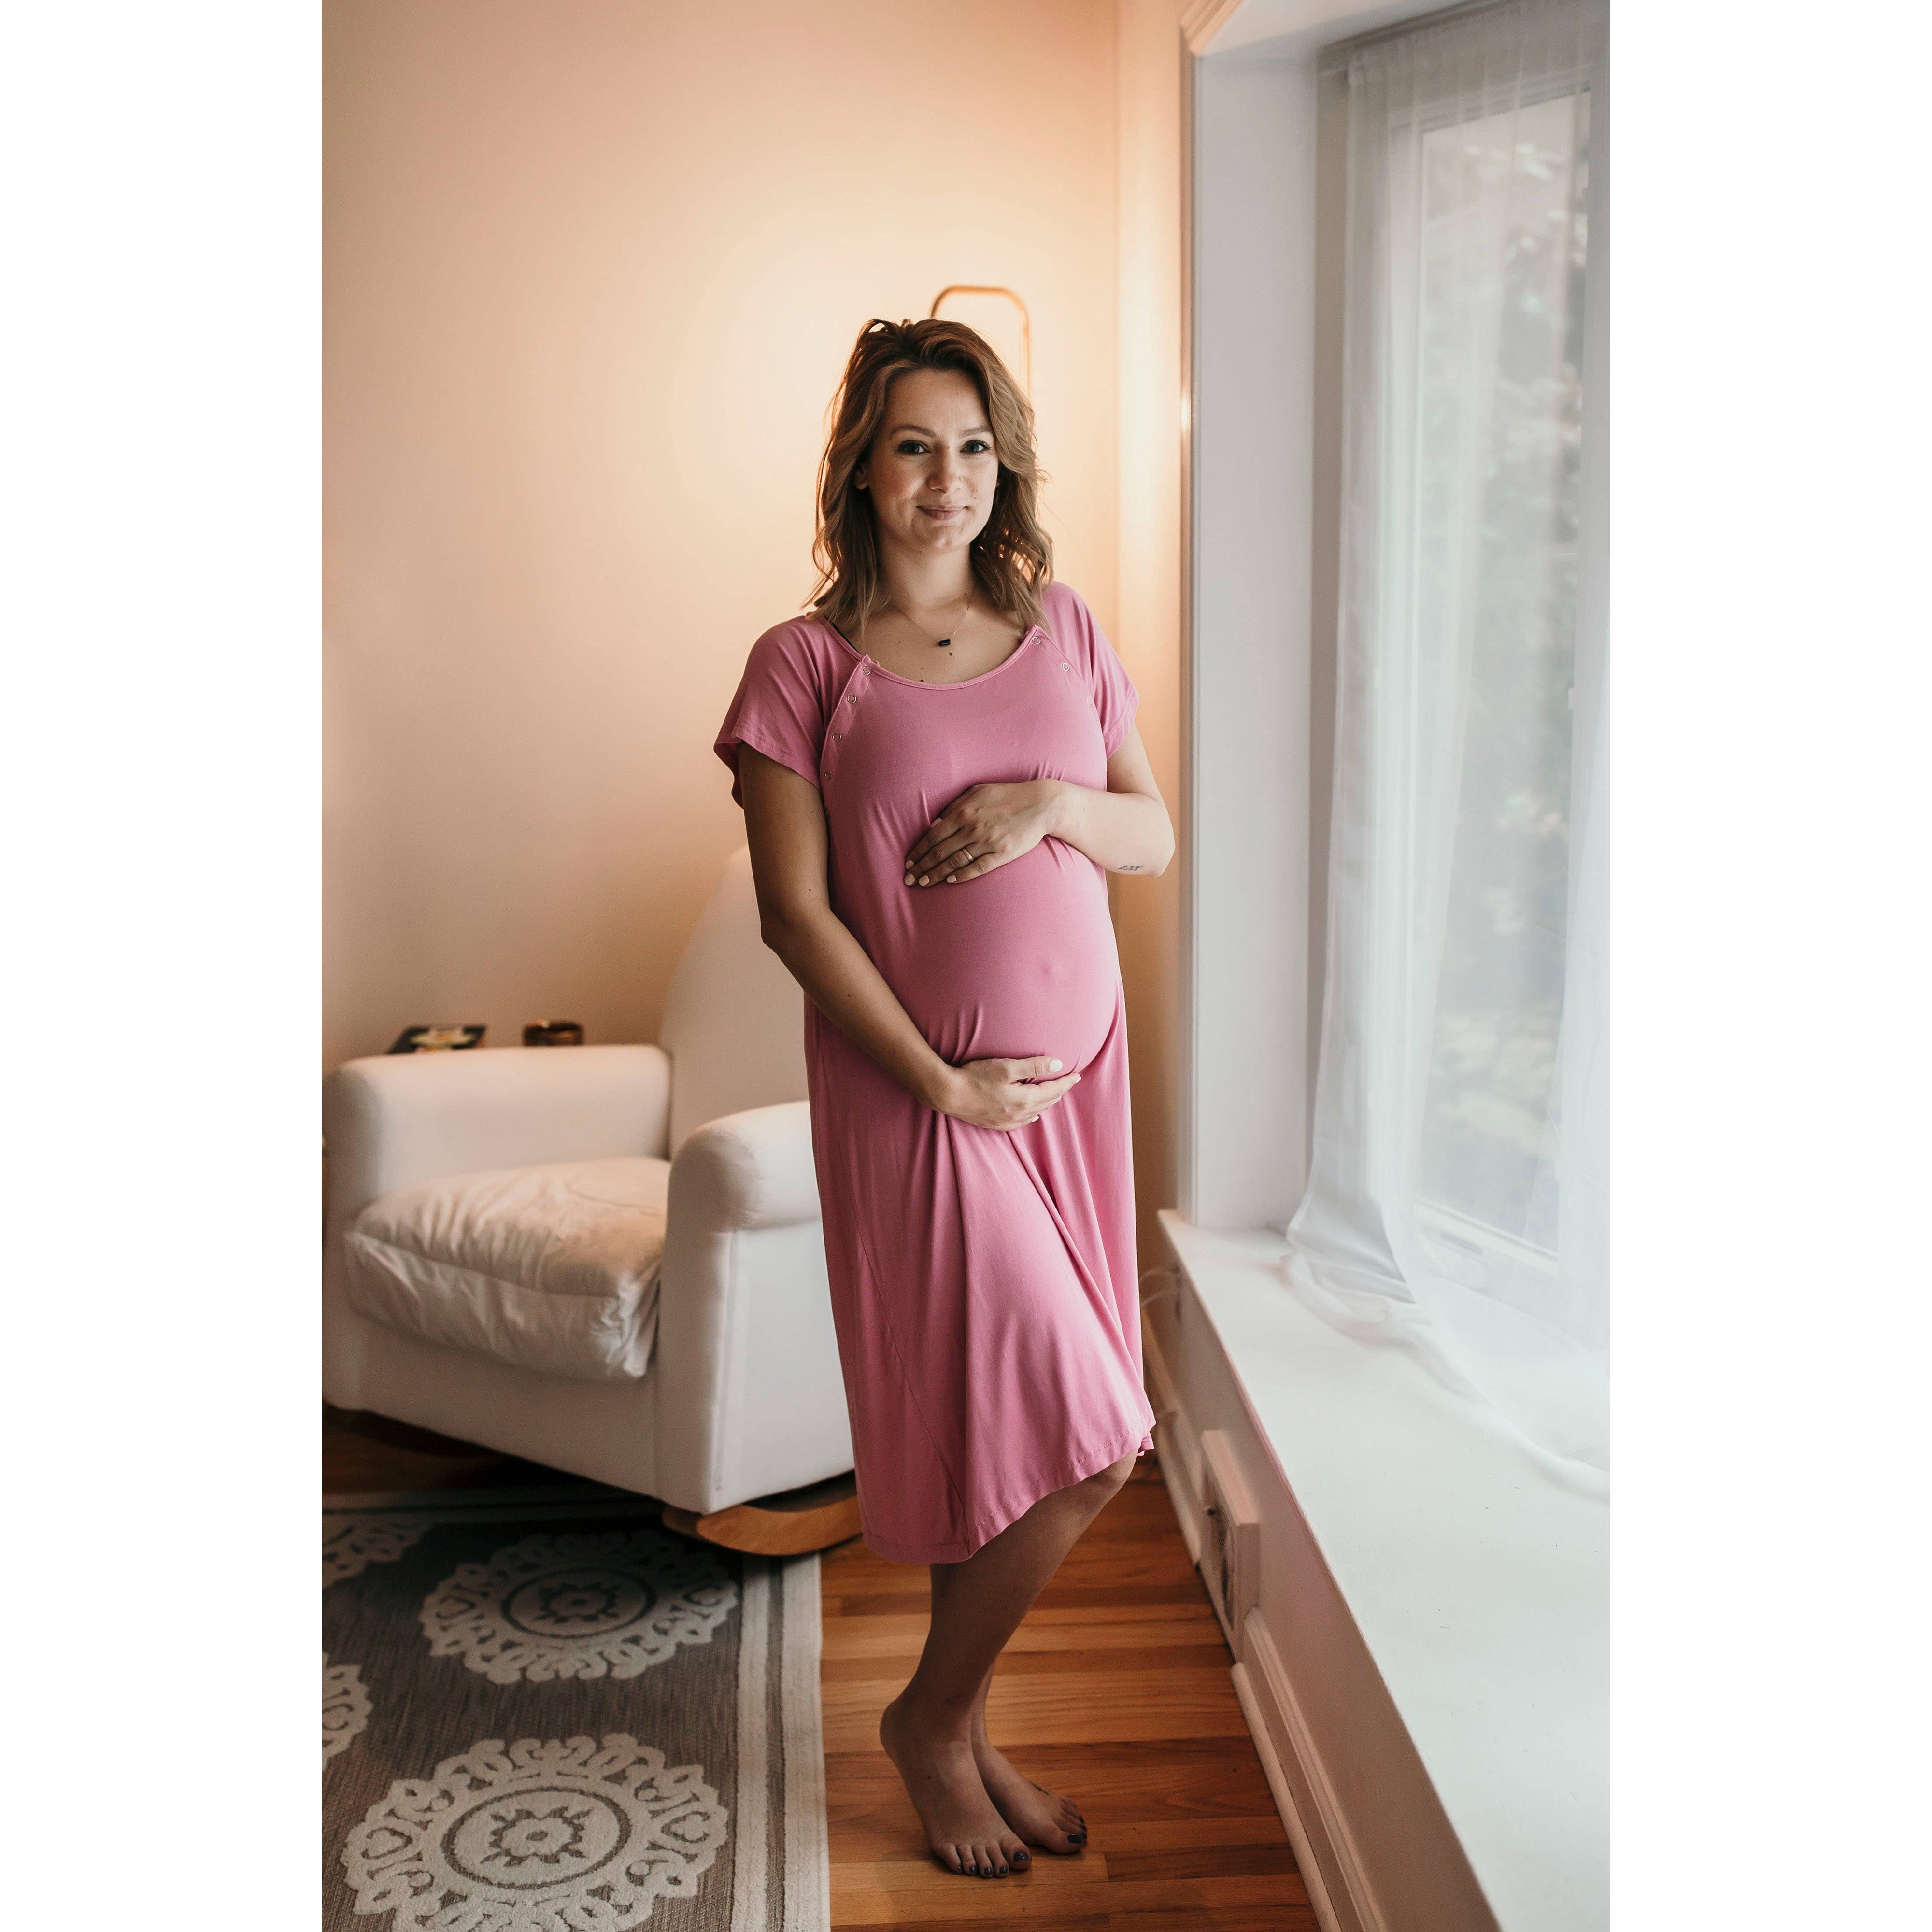 OBSI Birthing Gown - 3-in-1 Hospital Gown for Labor and Delivery, Size S/M  : Buy Online at Best Price in KSA - Souq is now Amazon.sa: Fashion